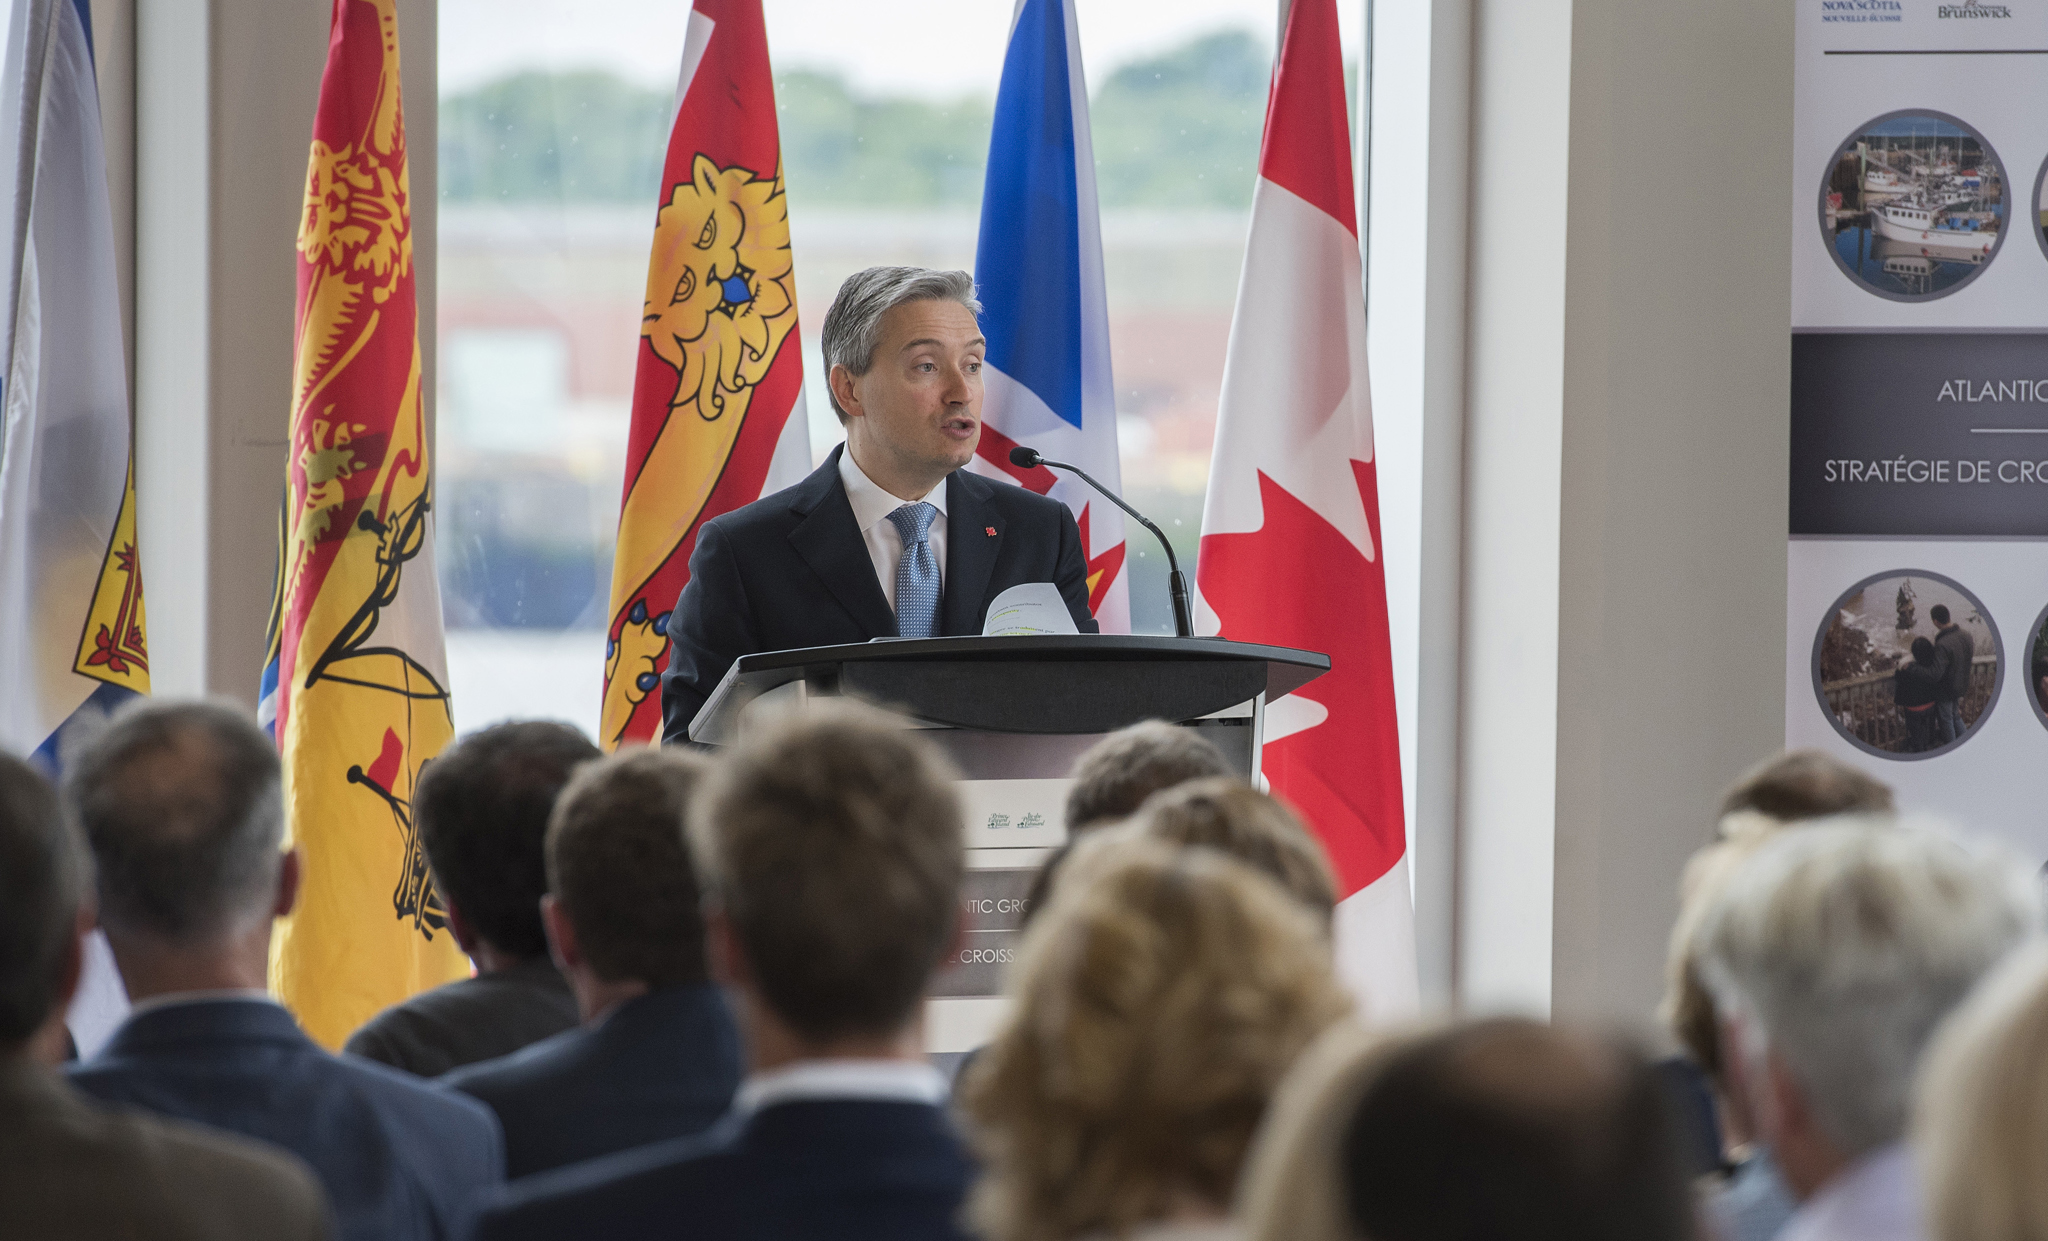 July 4, 2017 - The Honourable François-Philippe Champagne, Minister of International Trade speaks to members of the business community at the launch of the Atlantic Trade and Investment Growth Strategy in Saint John, New Brunswick.